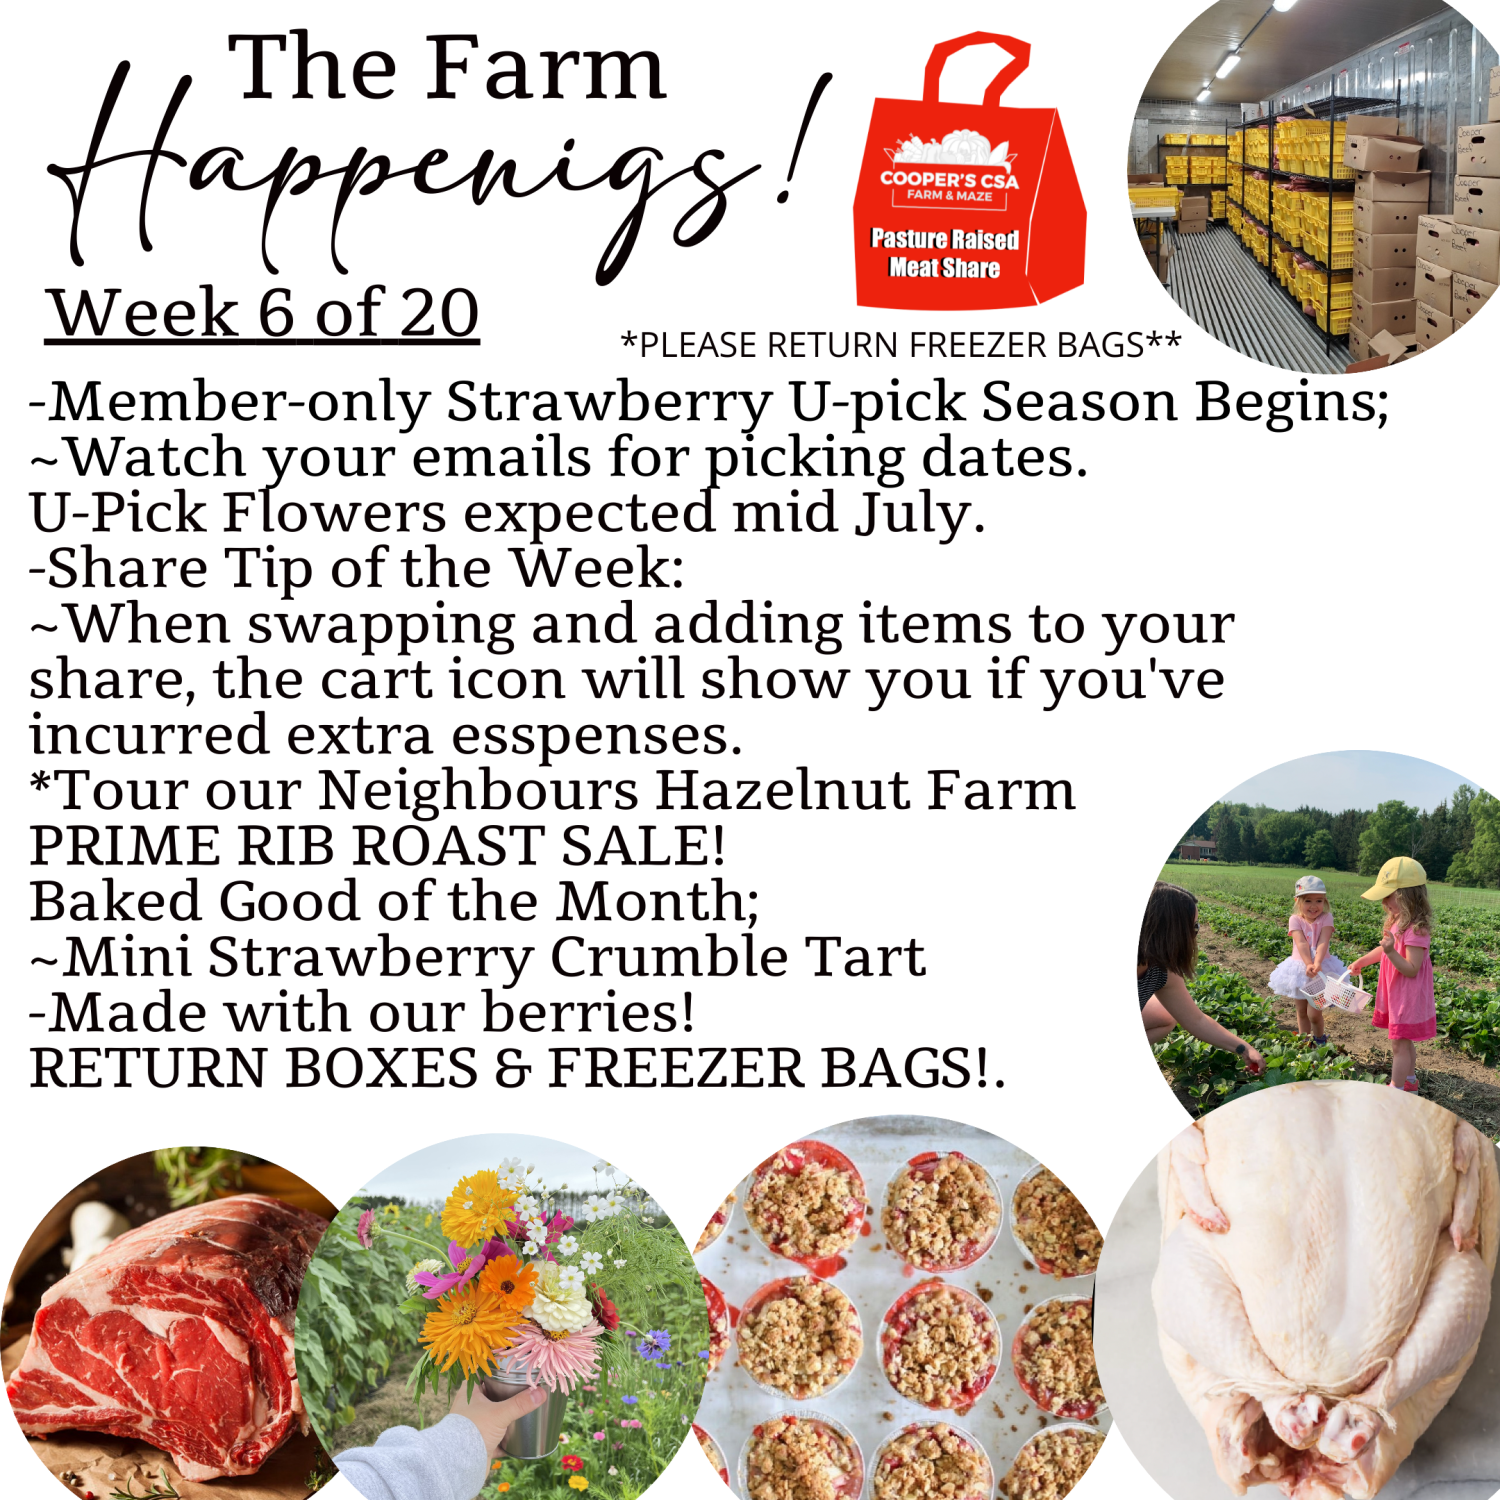 Next Happening: "Pasture Meat Shares"-Coopers CSA Farm Farm Happenings Week 6 of 20